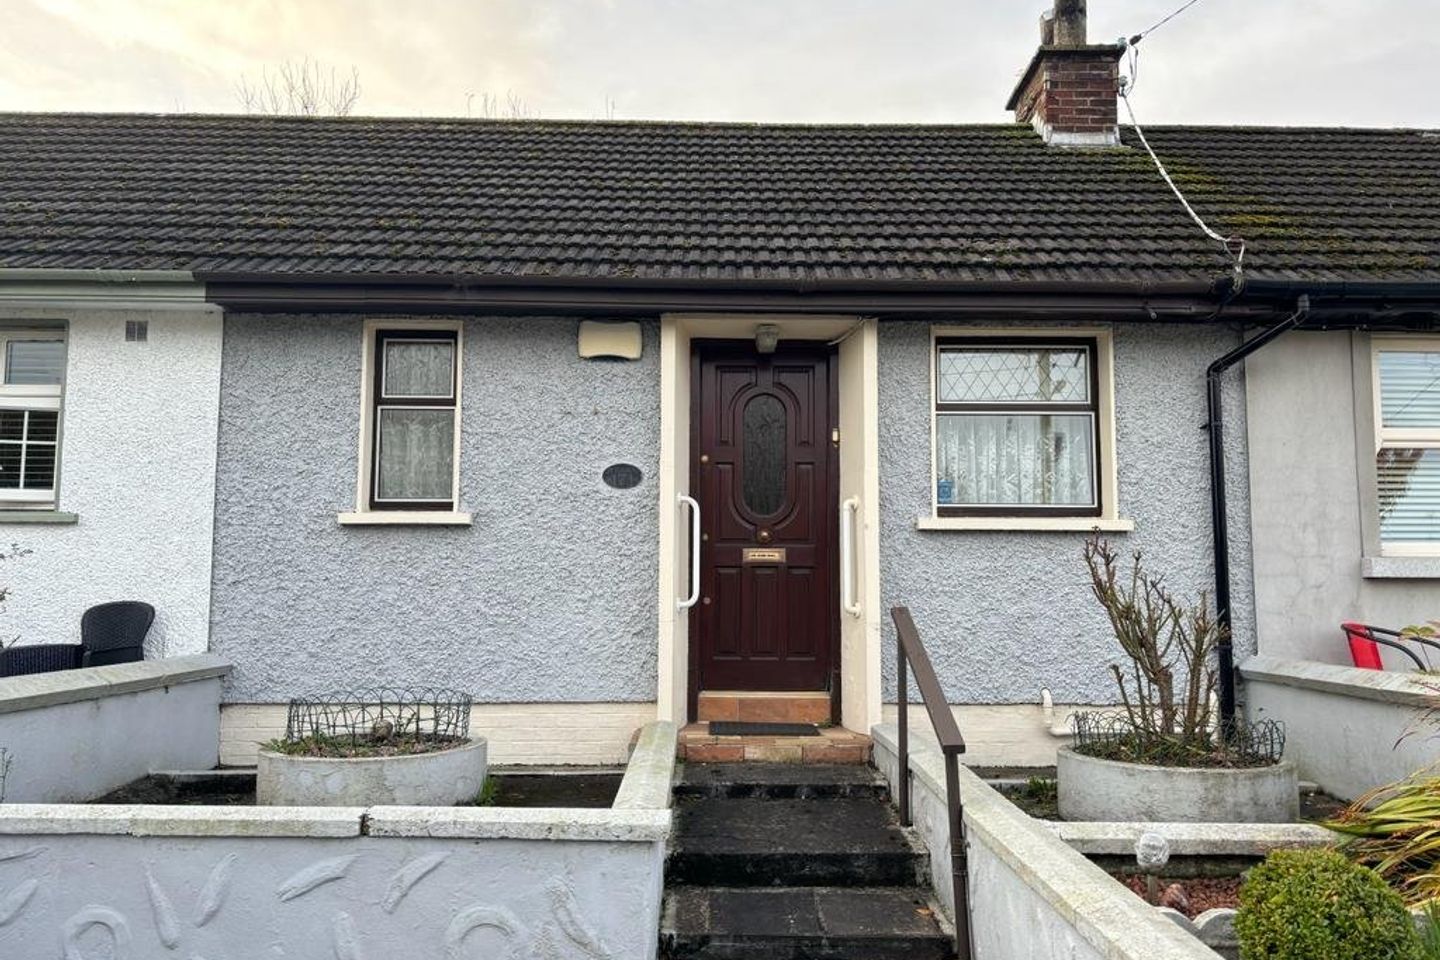 171 Marian Park, Drogheda, Co. Louth, A92WD3C